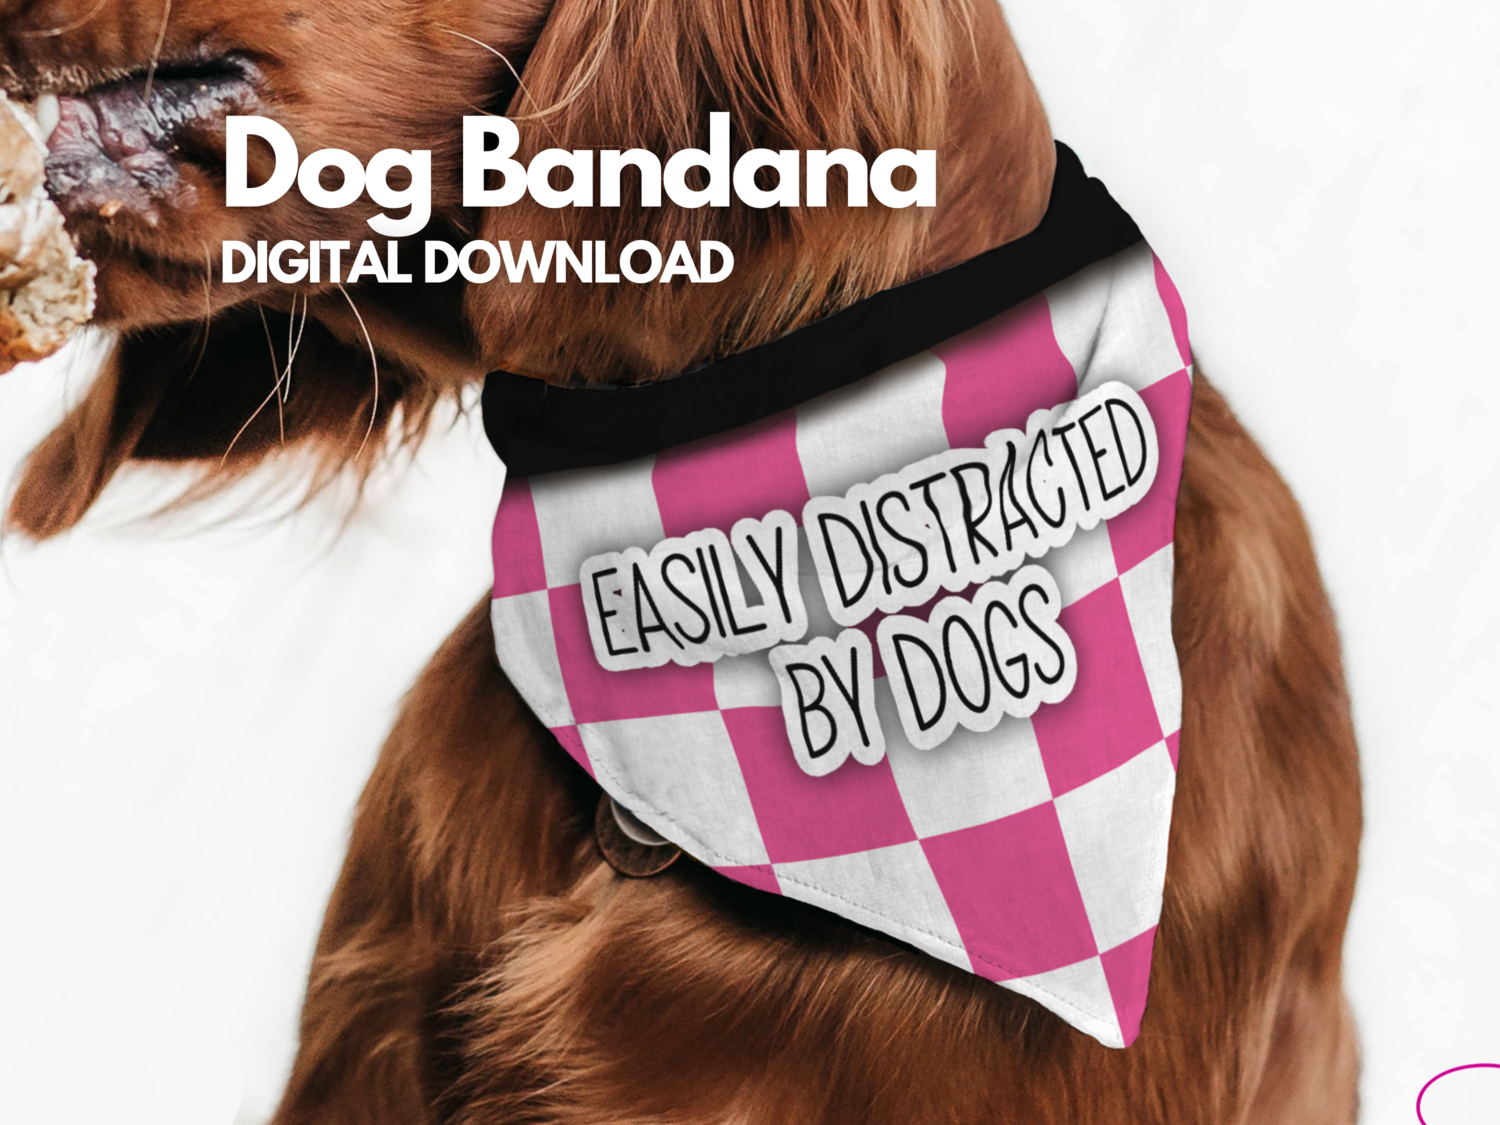 Dog Bandana - Easily distracted by dogs